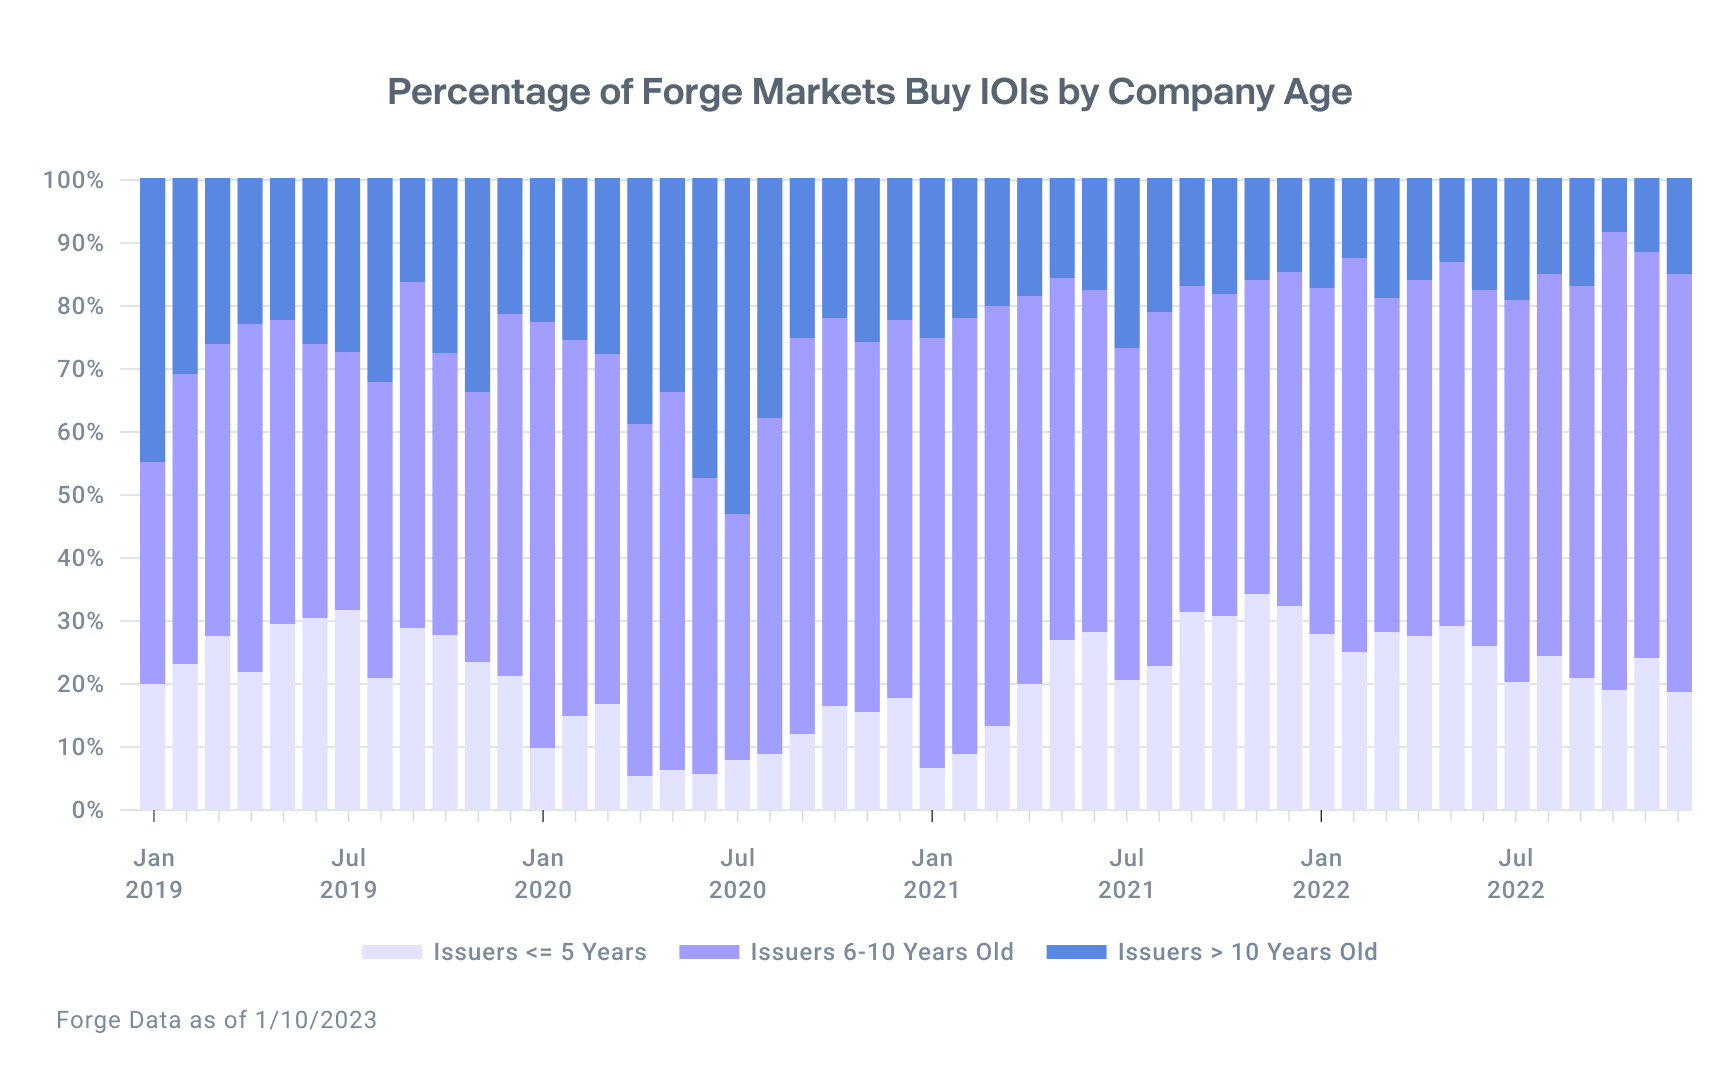 Graph shows a higher percentage of Forge Markets Buy IOIs for 6 to 10 years old companies